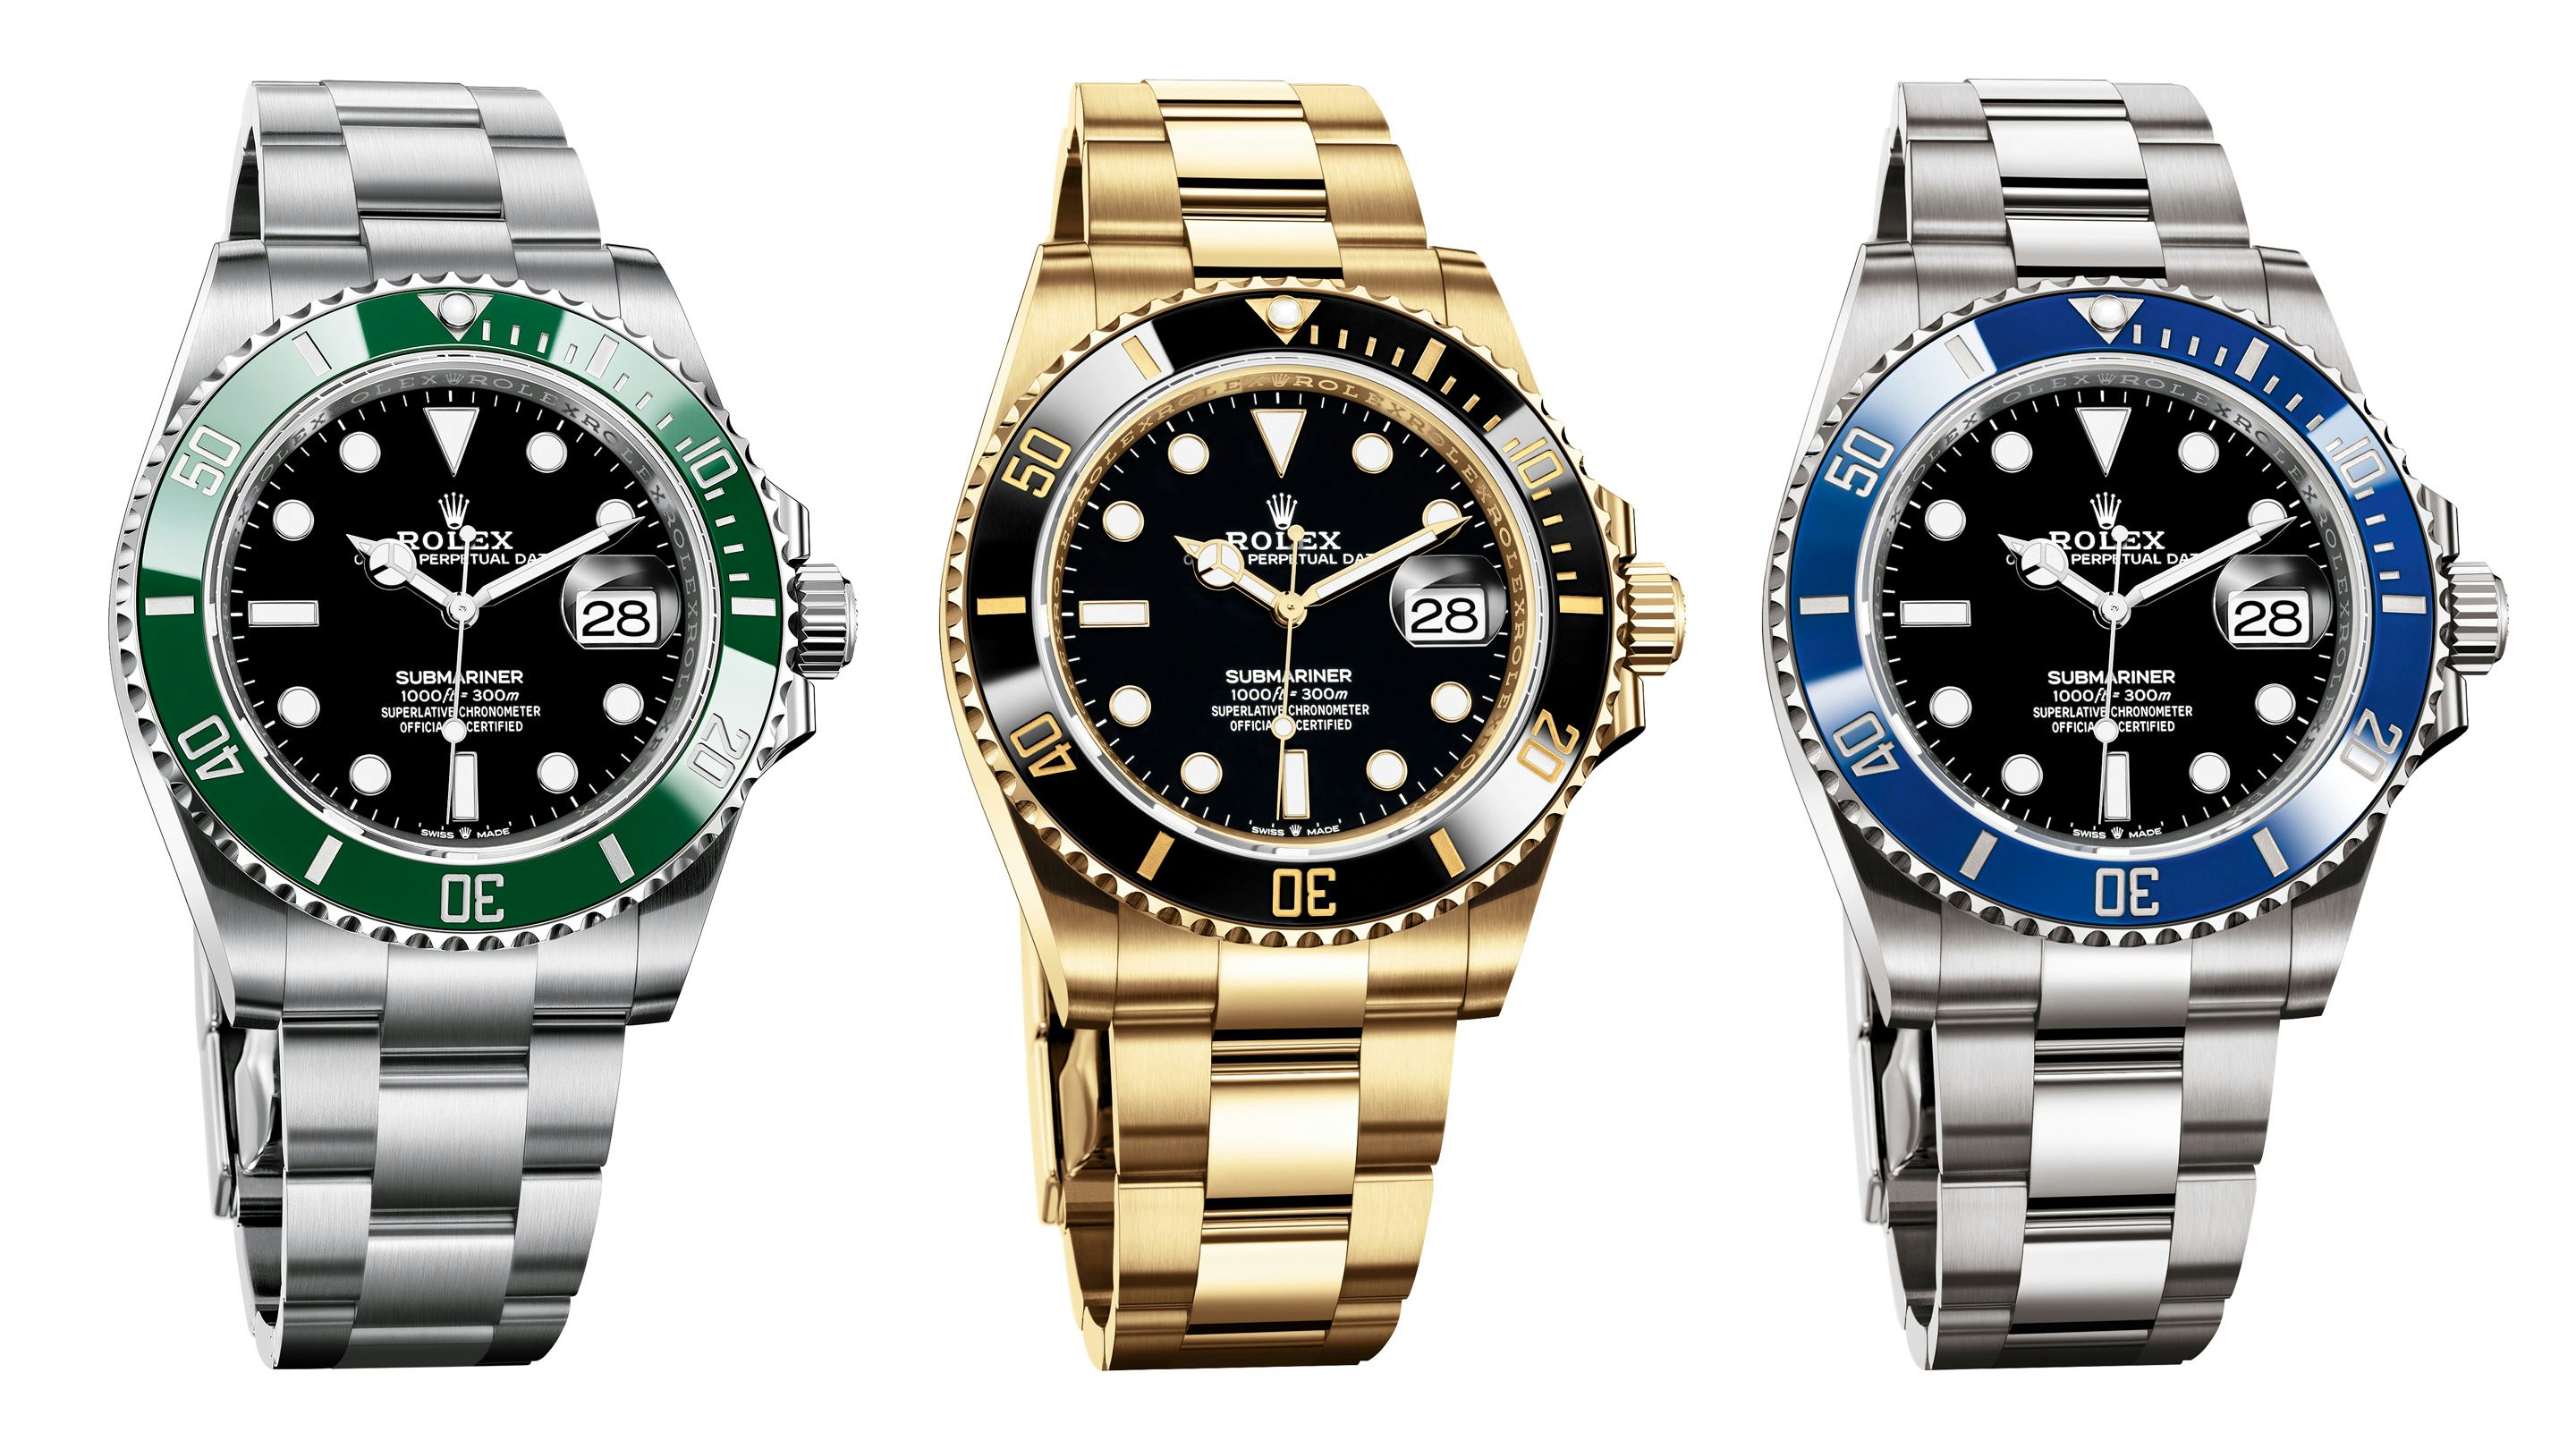 What Happened to the Rolex Hulk?